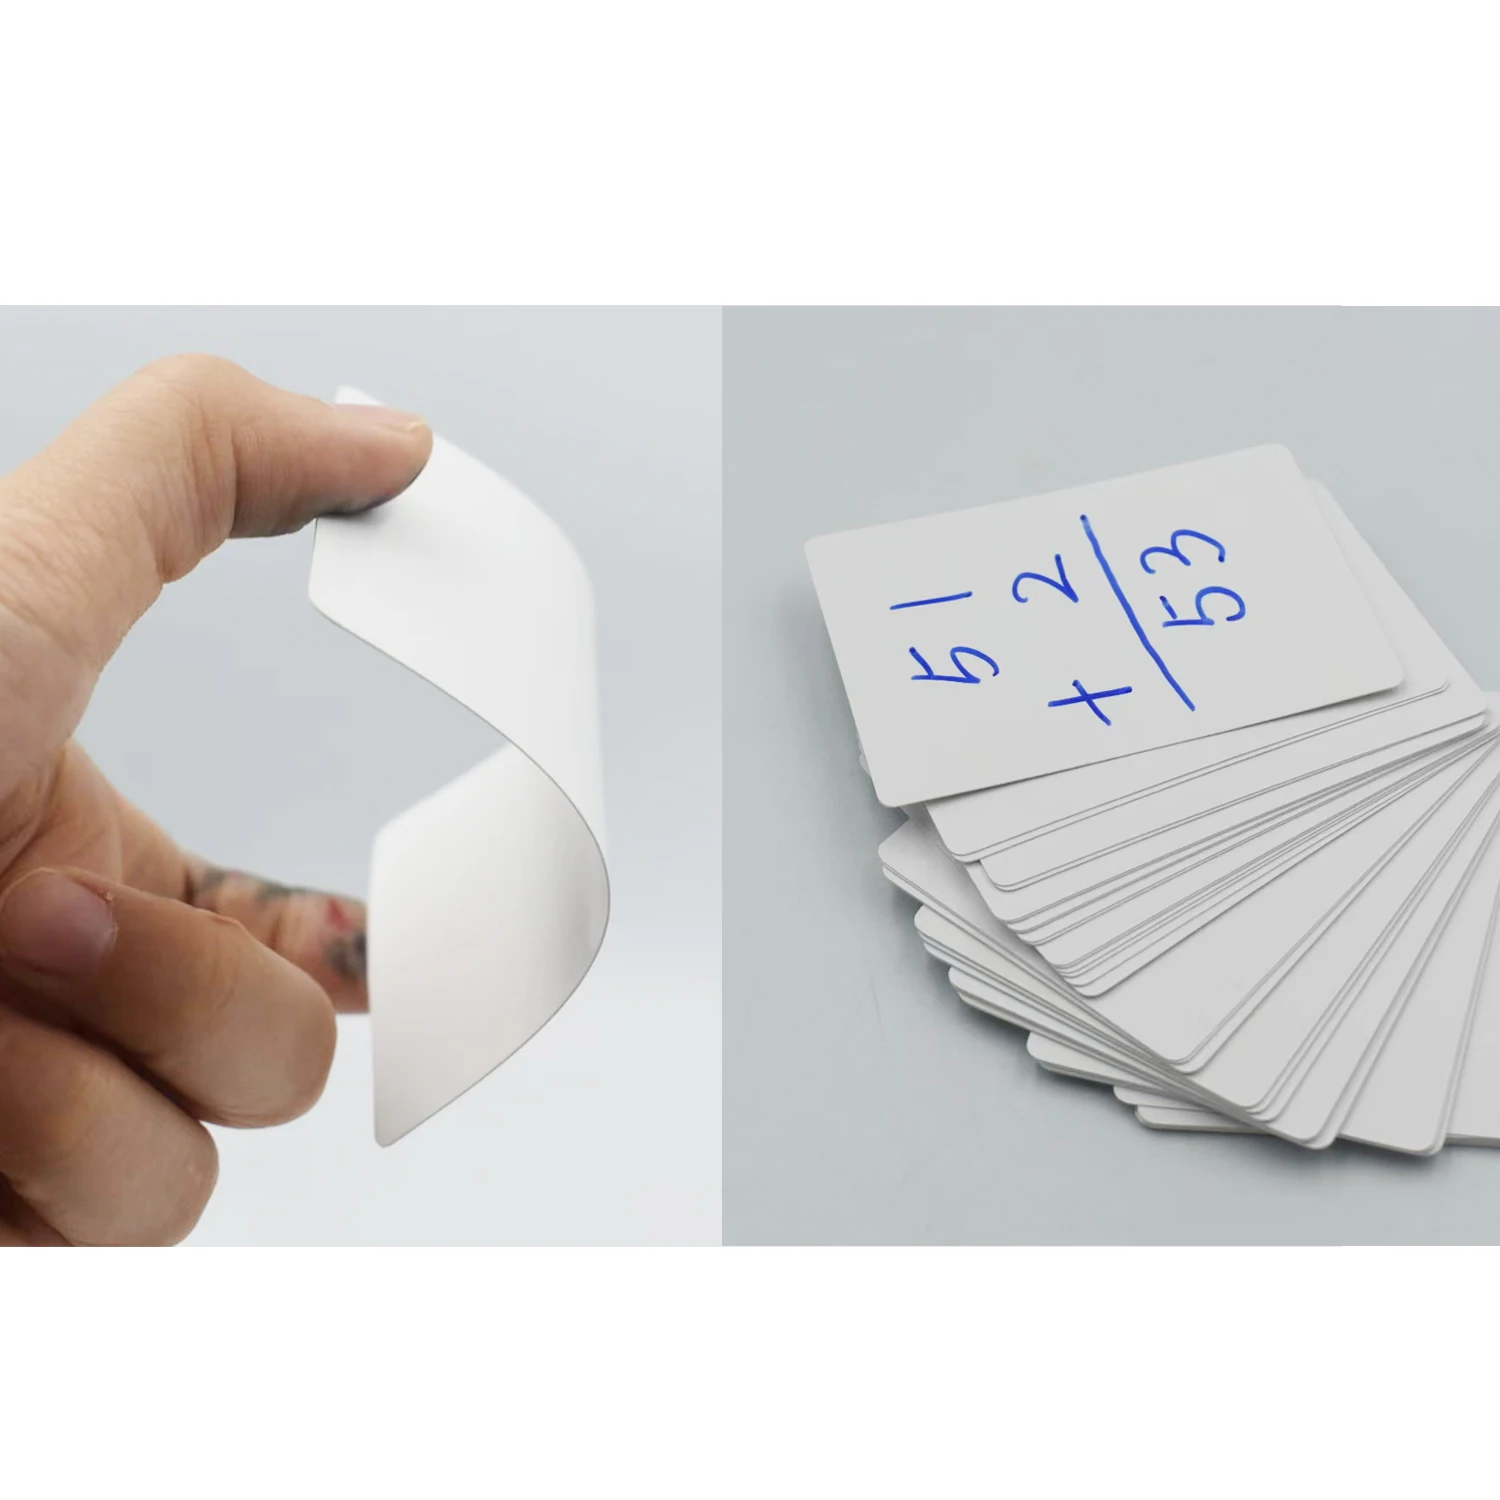 blank playing cards to write on